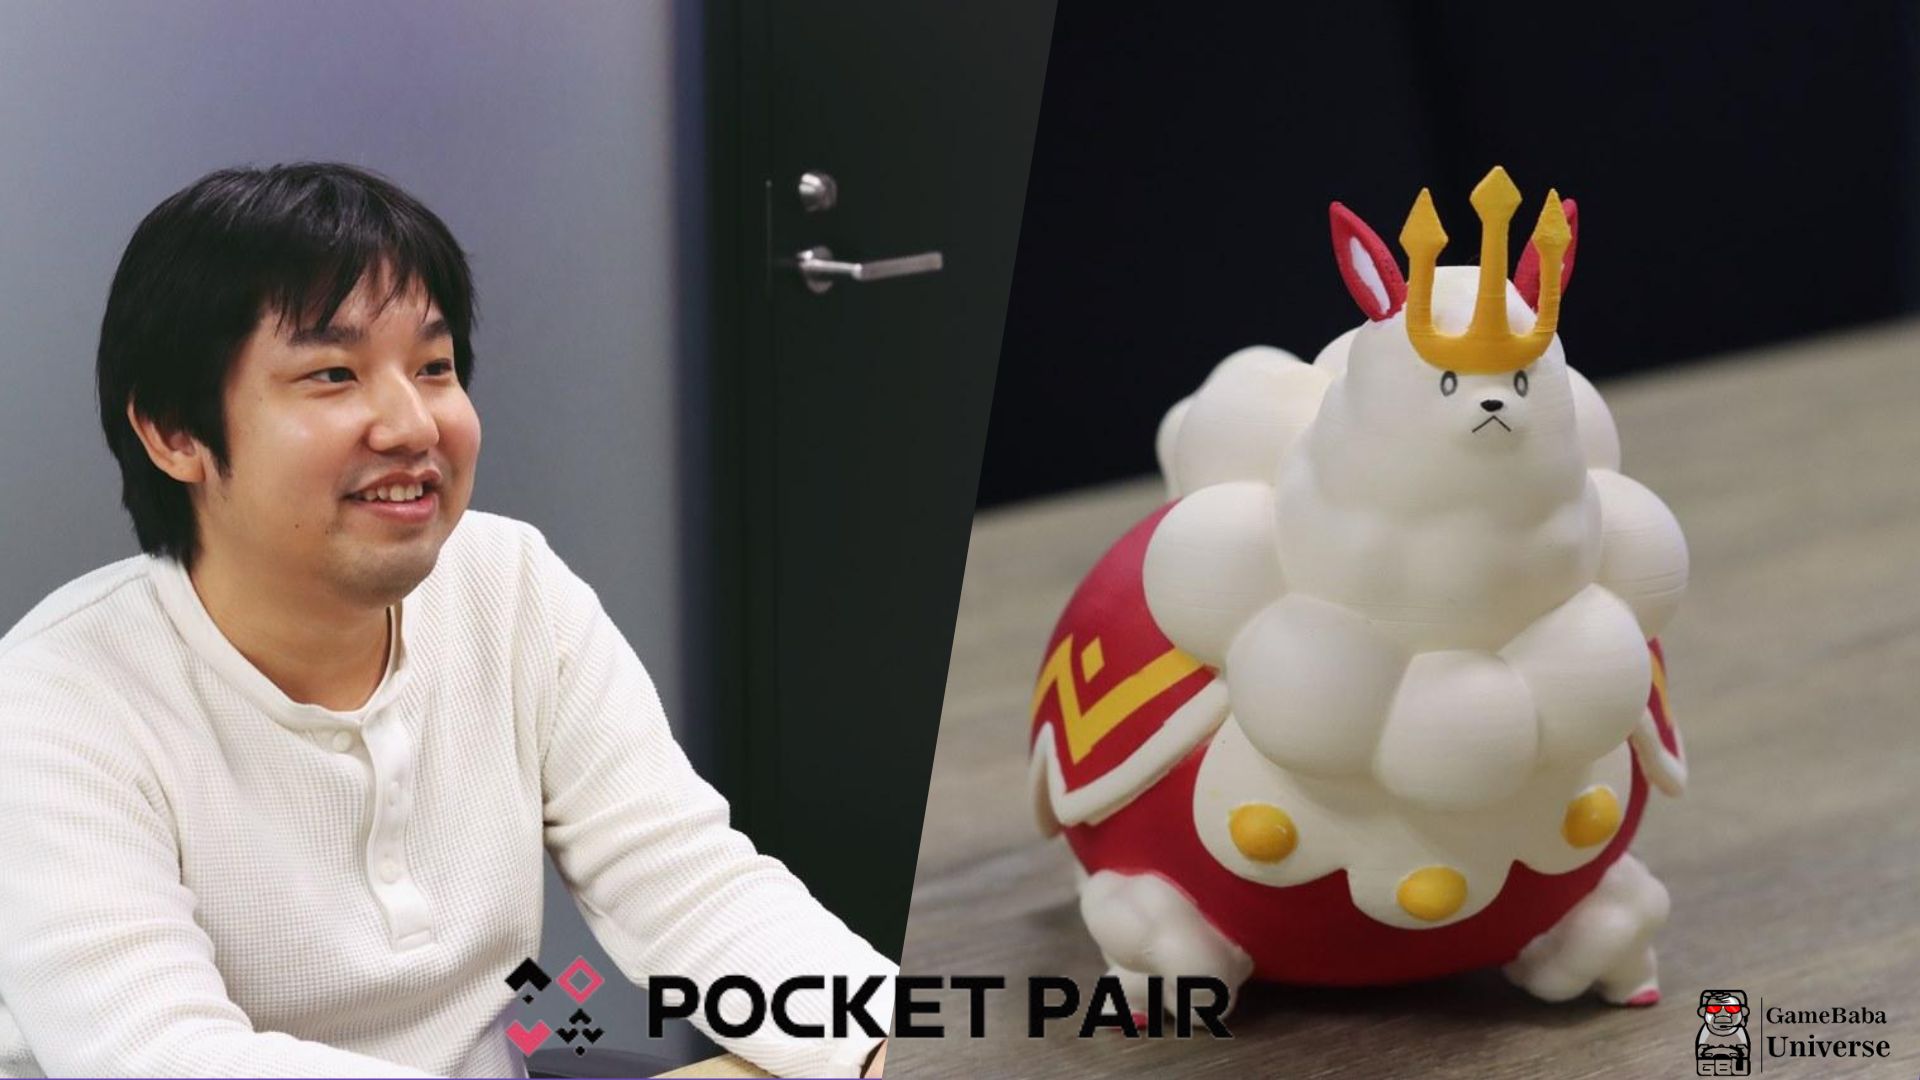 “Pokémon Is So Good To Compare It To Palworld” Said Pocketpair CEO, Plans For PvP Mode